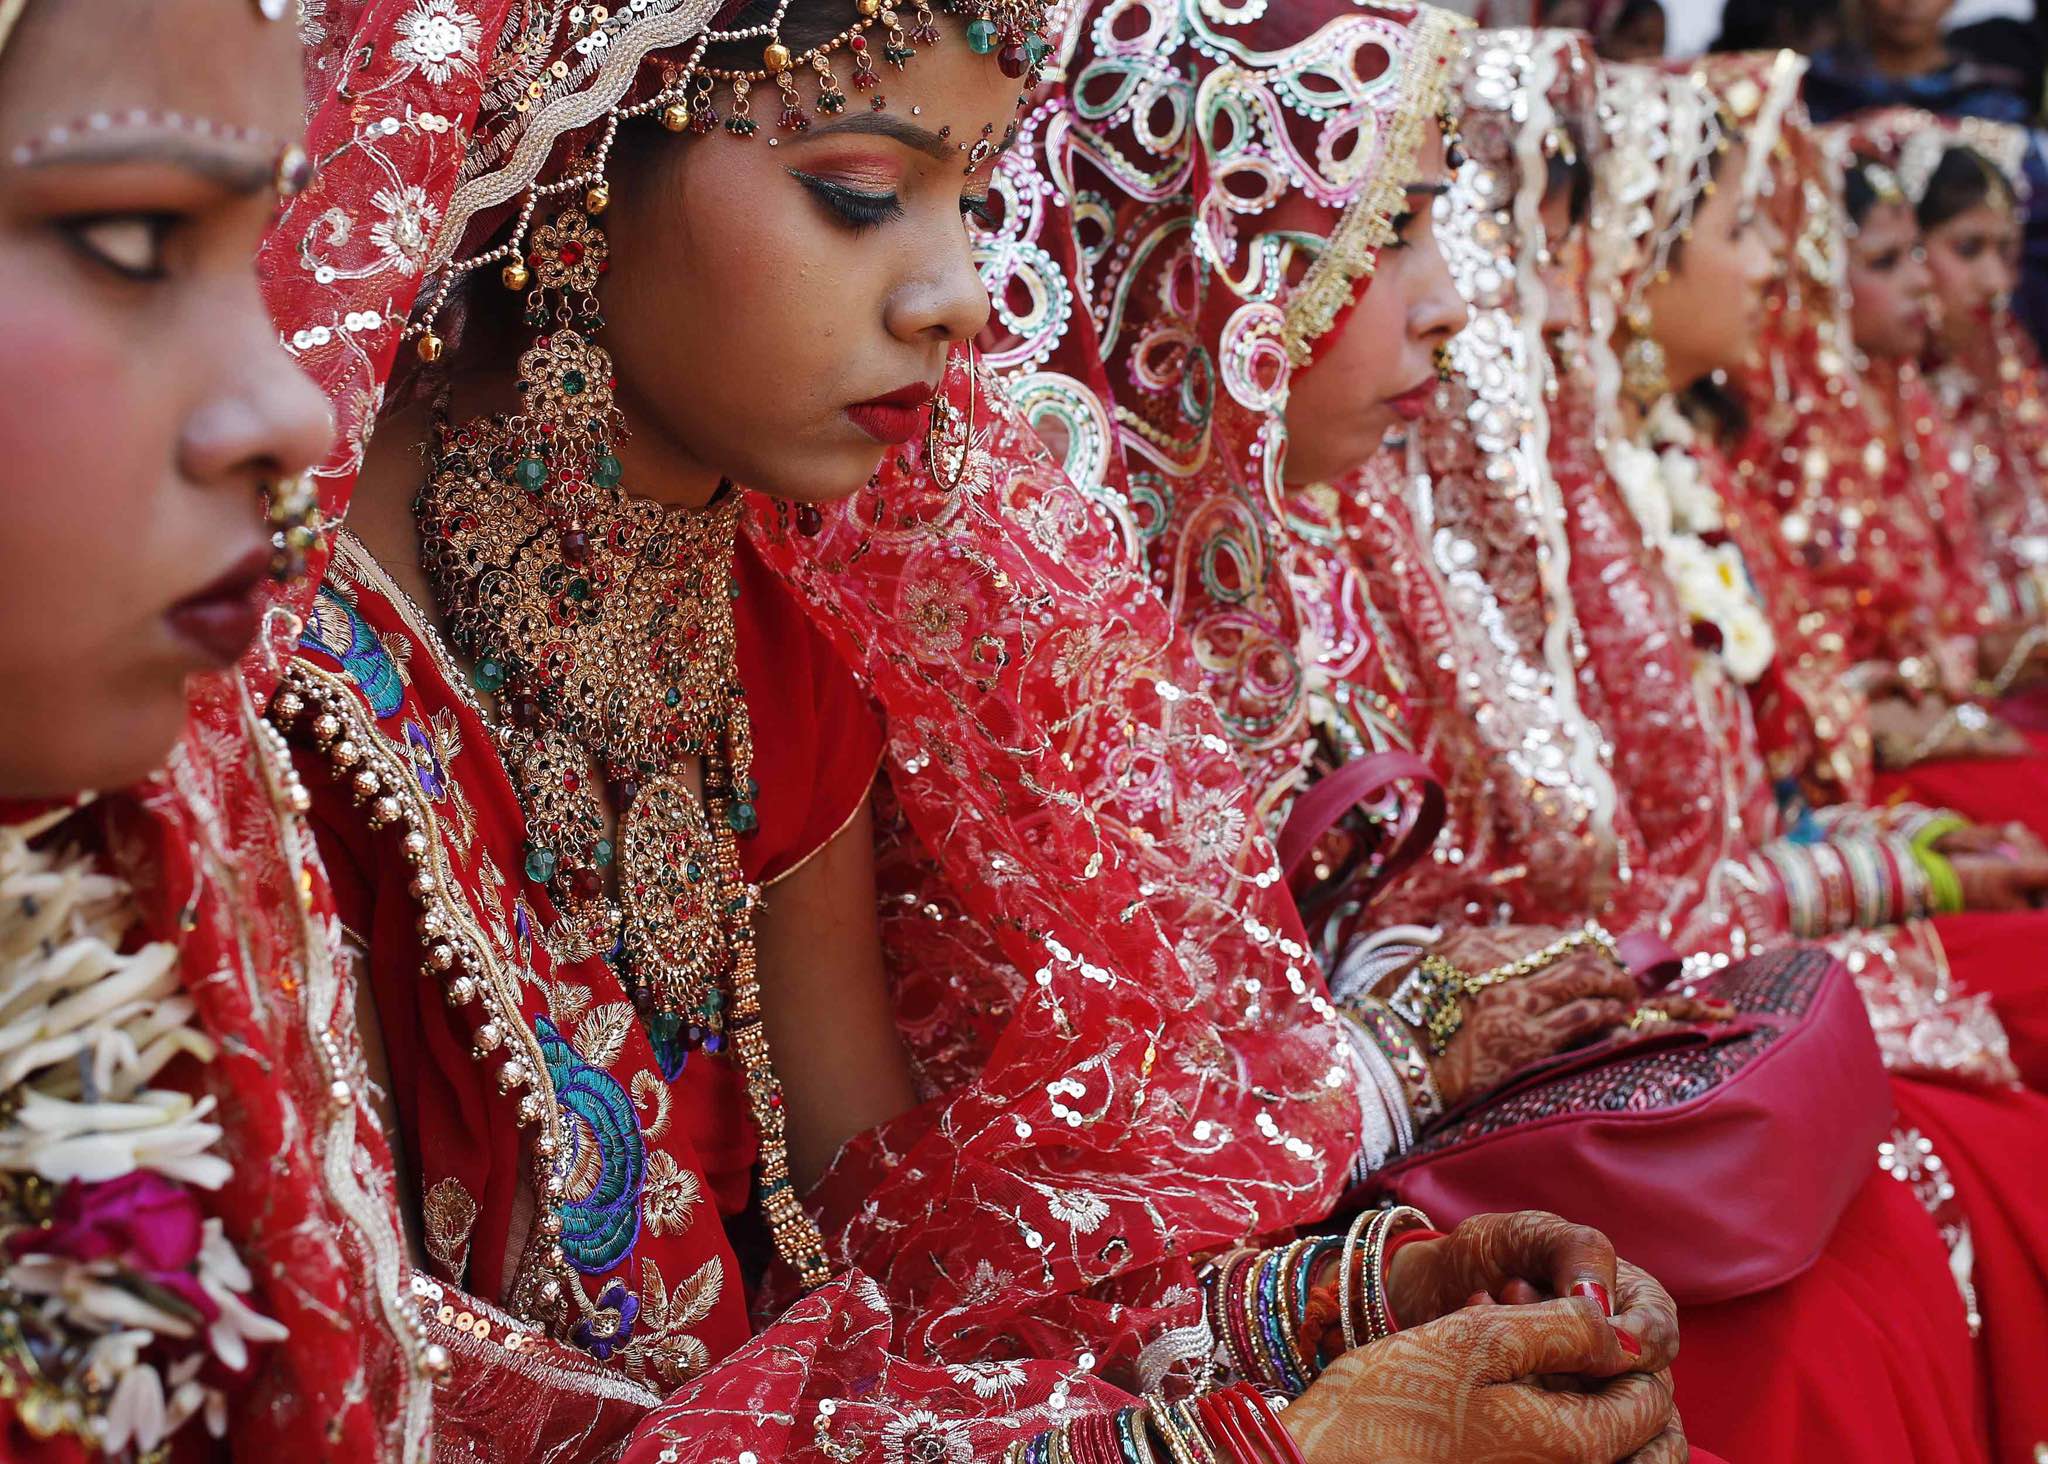 Empowered Step in Raising Girl's Marriage Age